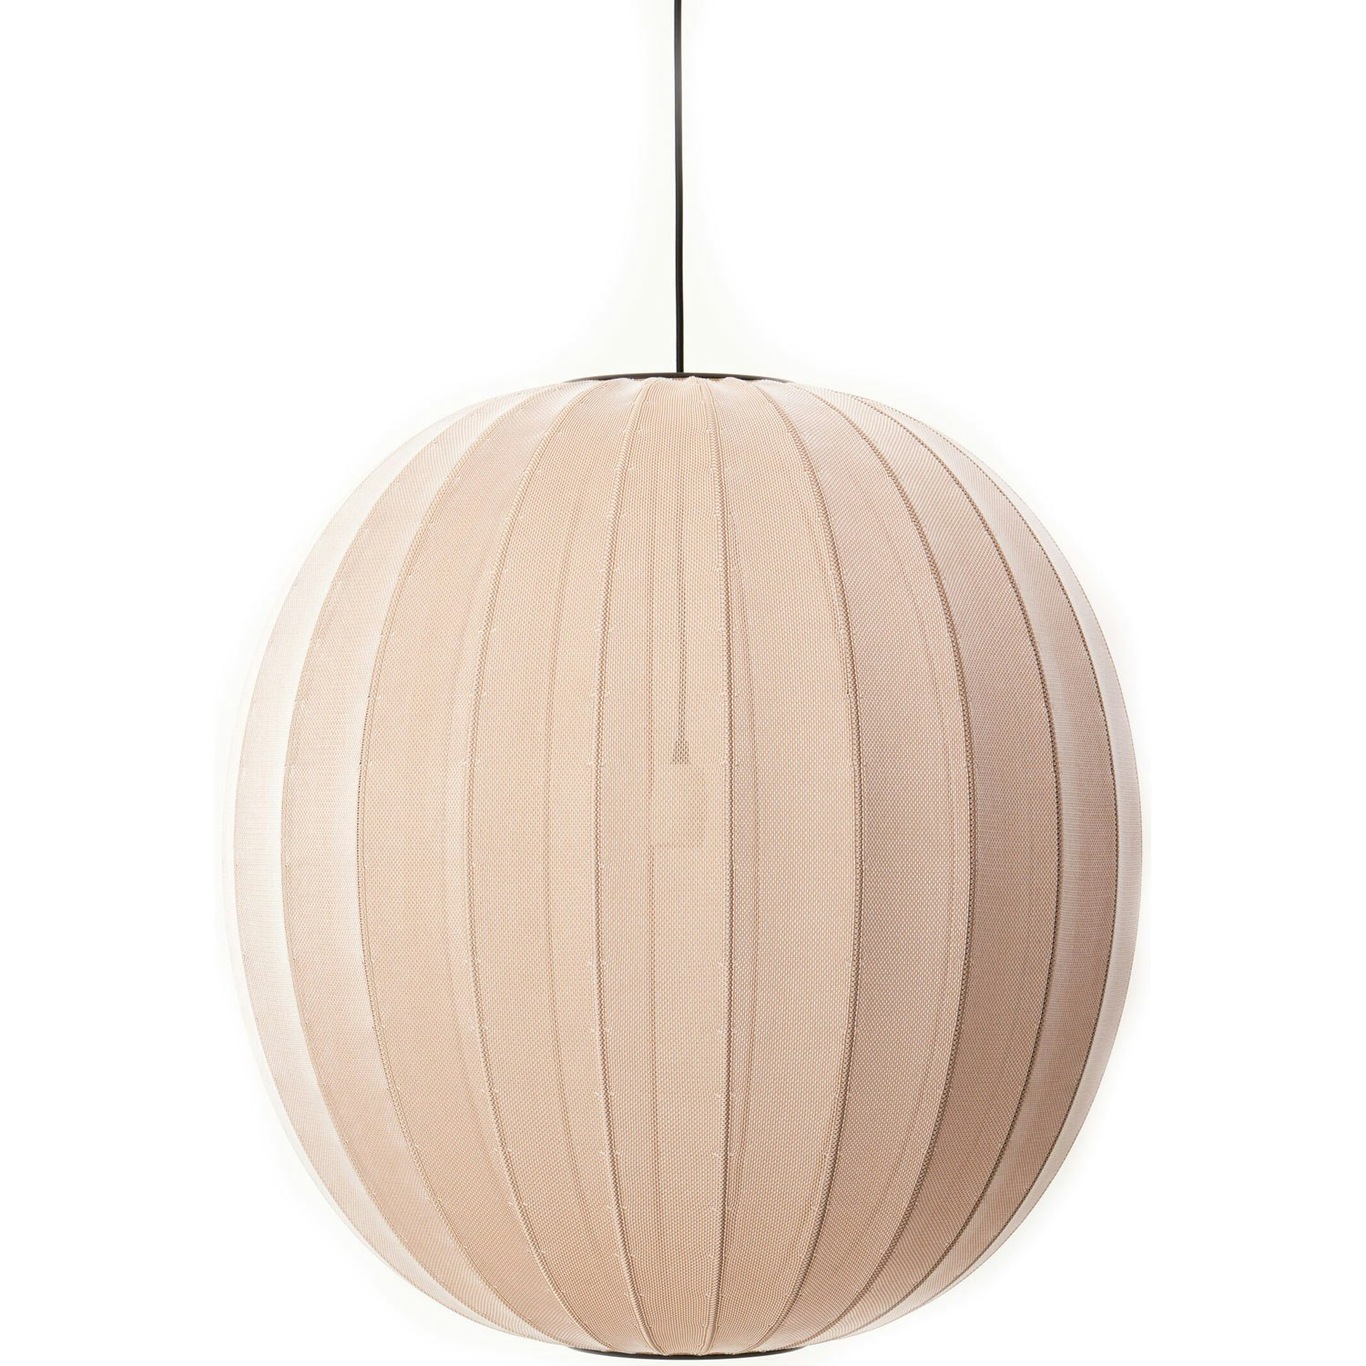 Knit-Wit Hanglamp Rond 75 cm, Sand Stone